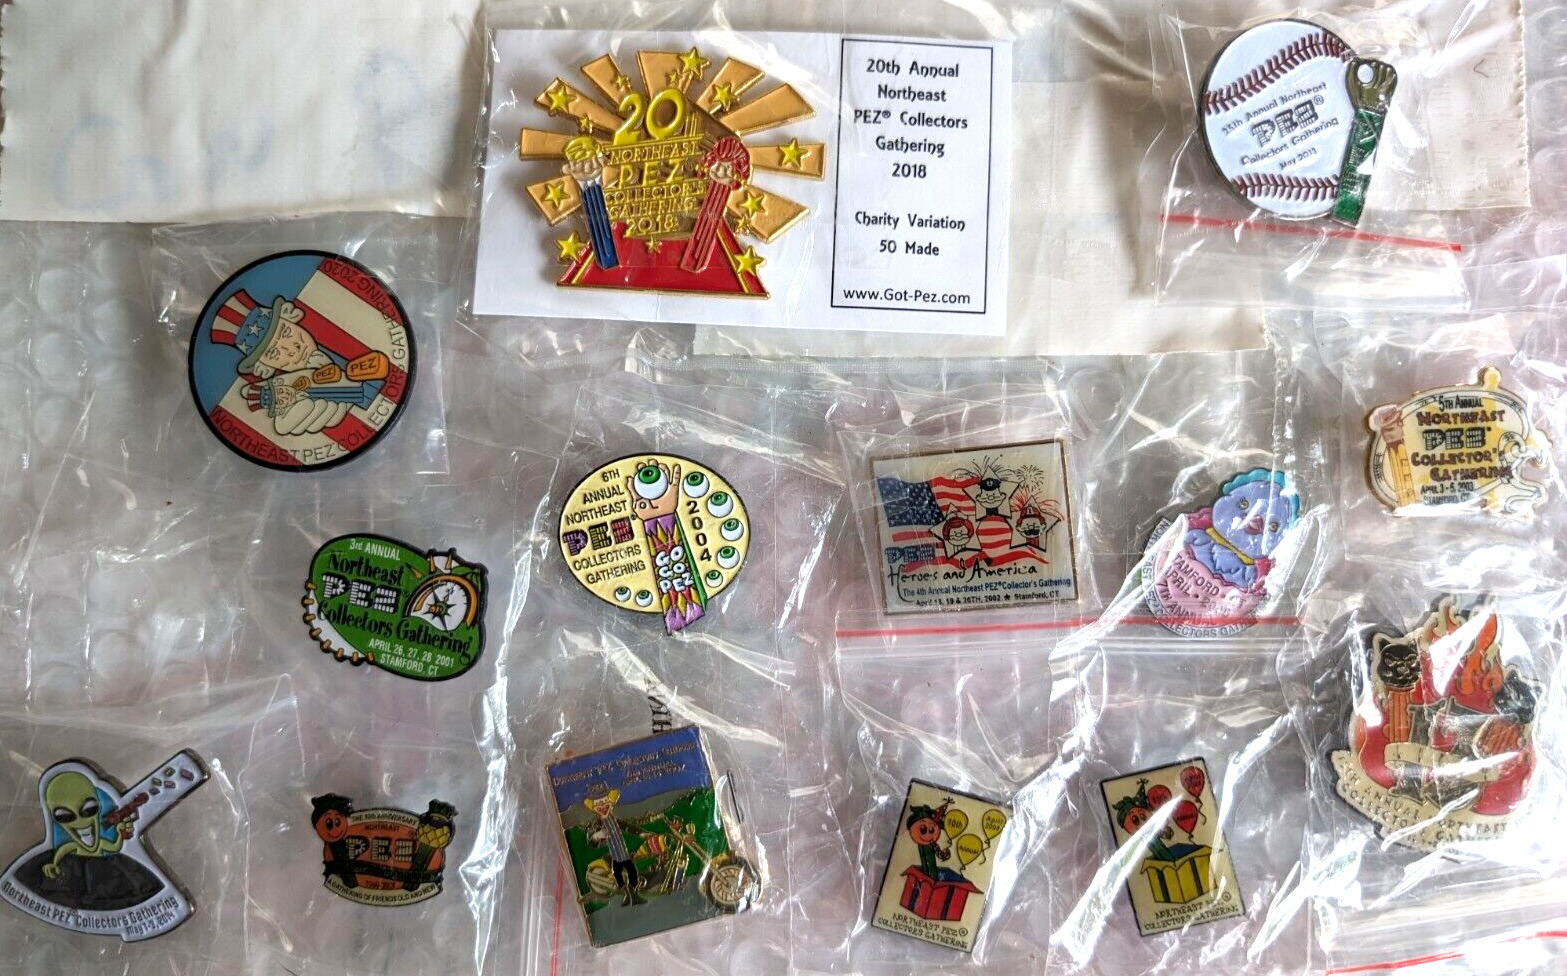 PEZ Northeast PEZ Con collector pins-LOT OF 14 limited- less than $2 each